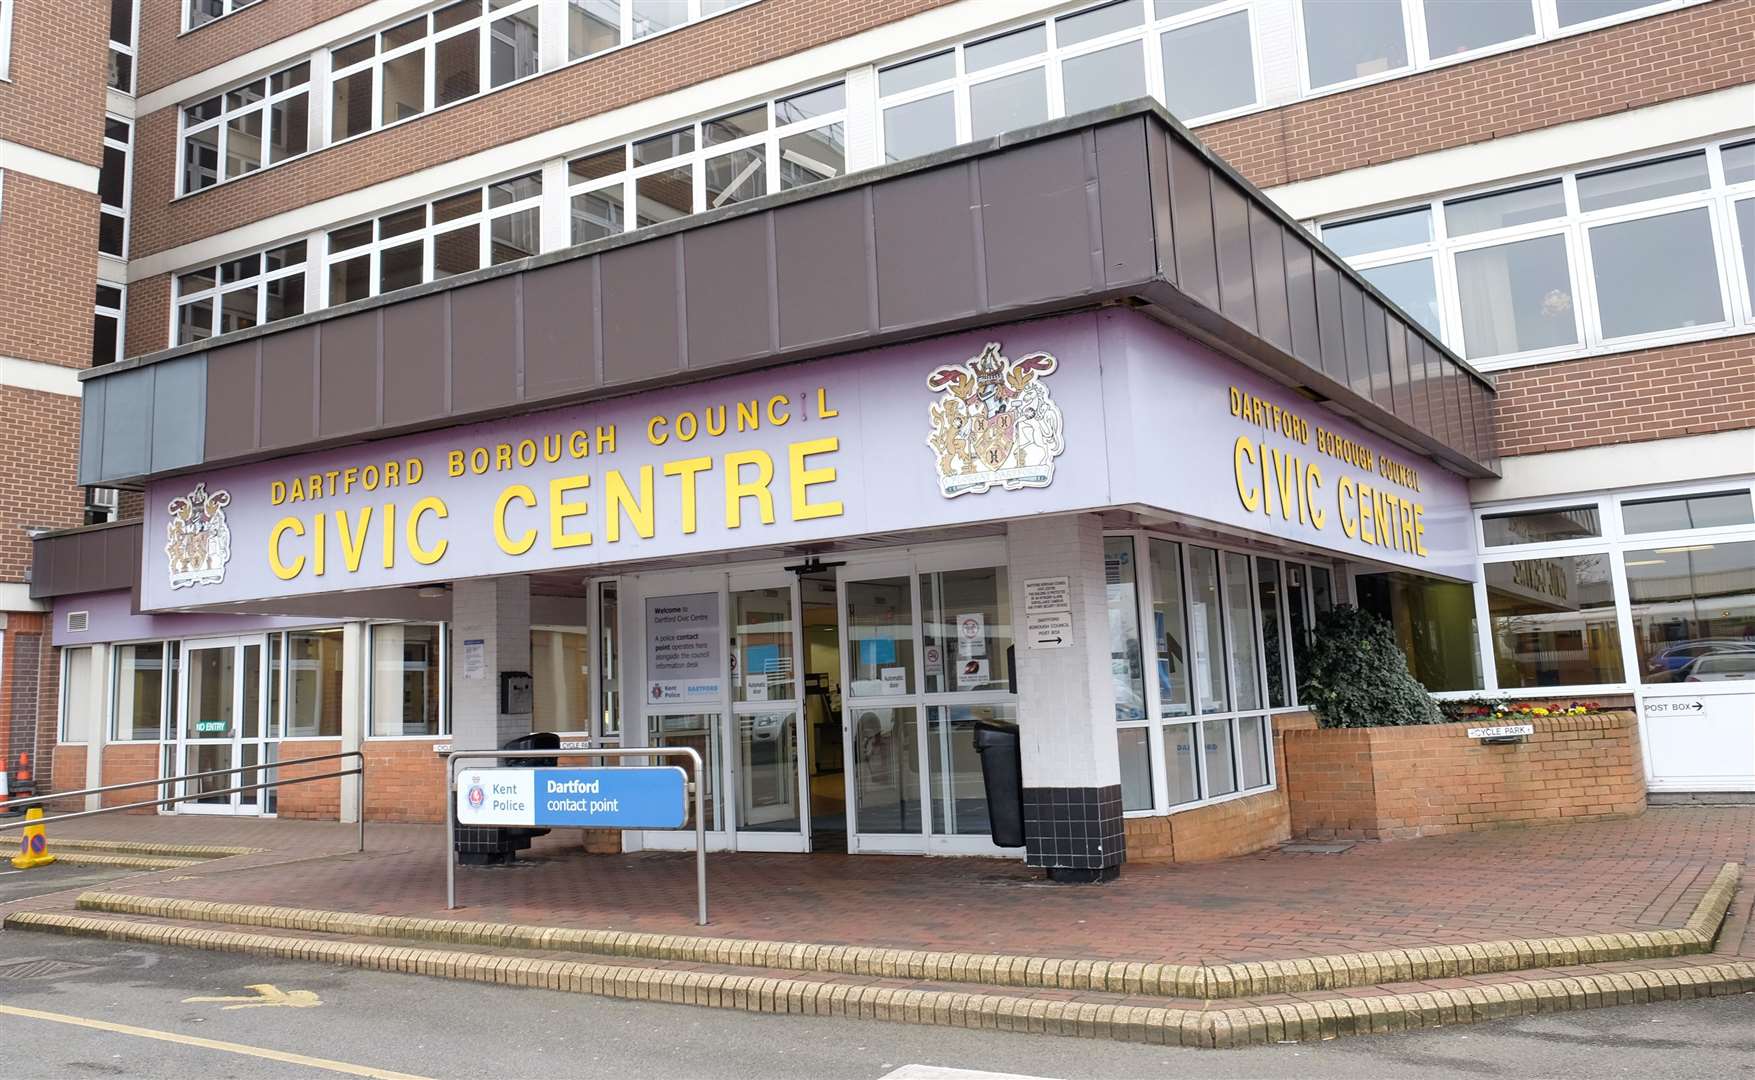 A decision will be made at Dartford Civic Centre next Thursday